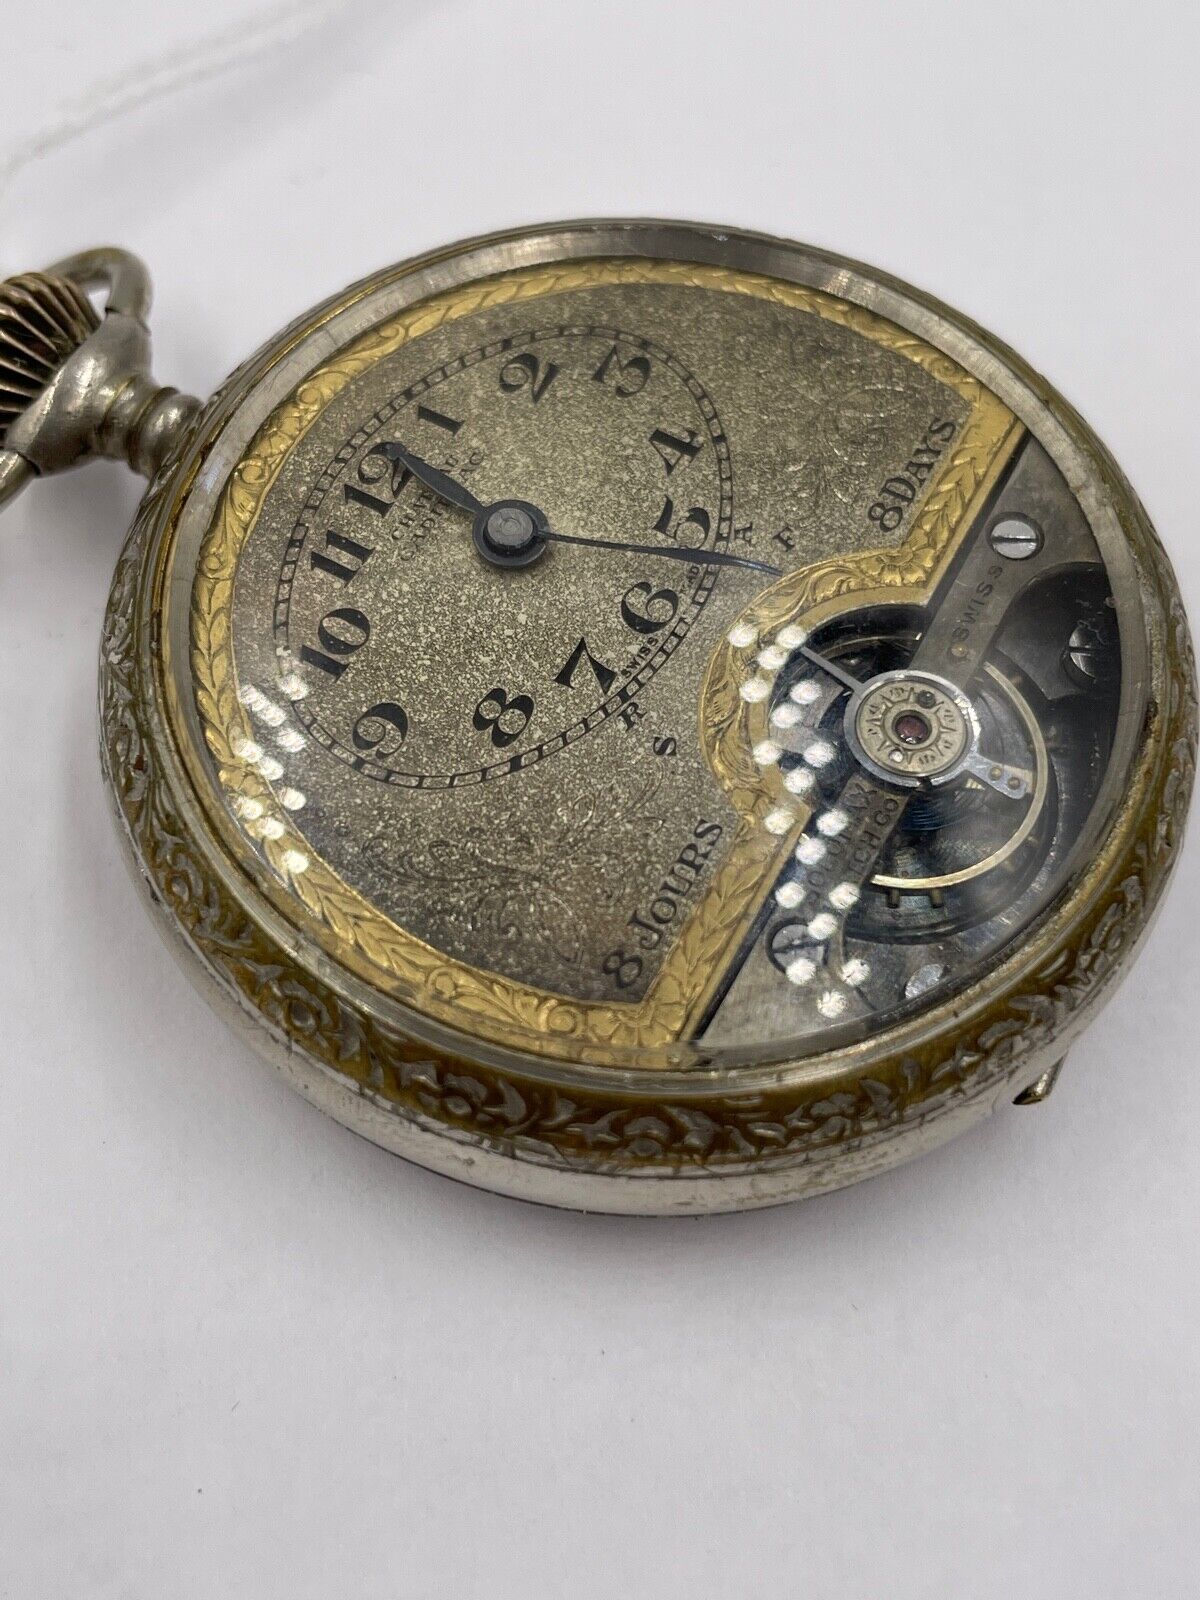 Solomax Chateau Cadillac 8 Day Pocket Watch Openscape Engraved case Rare